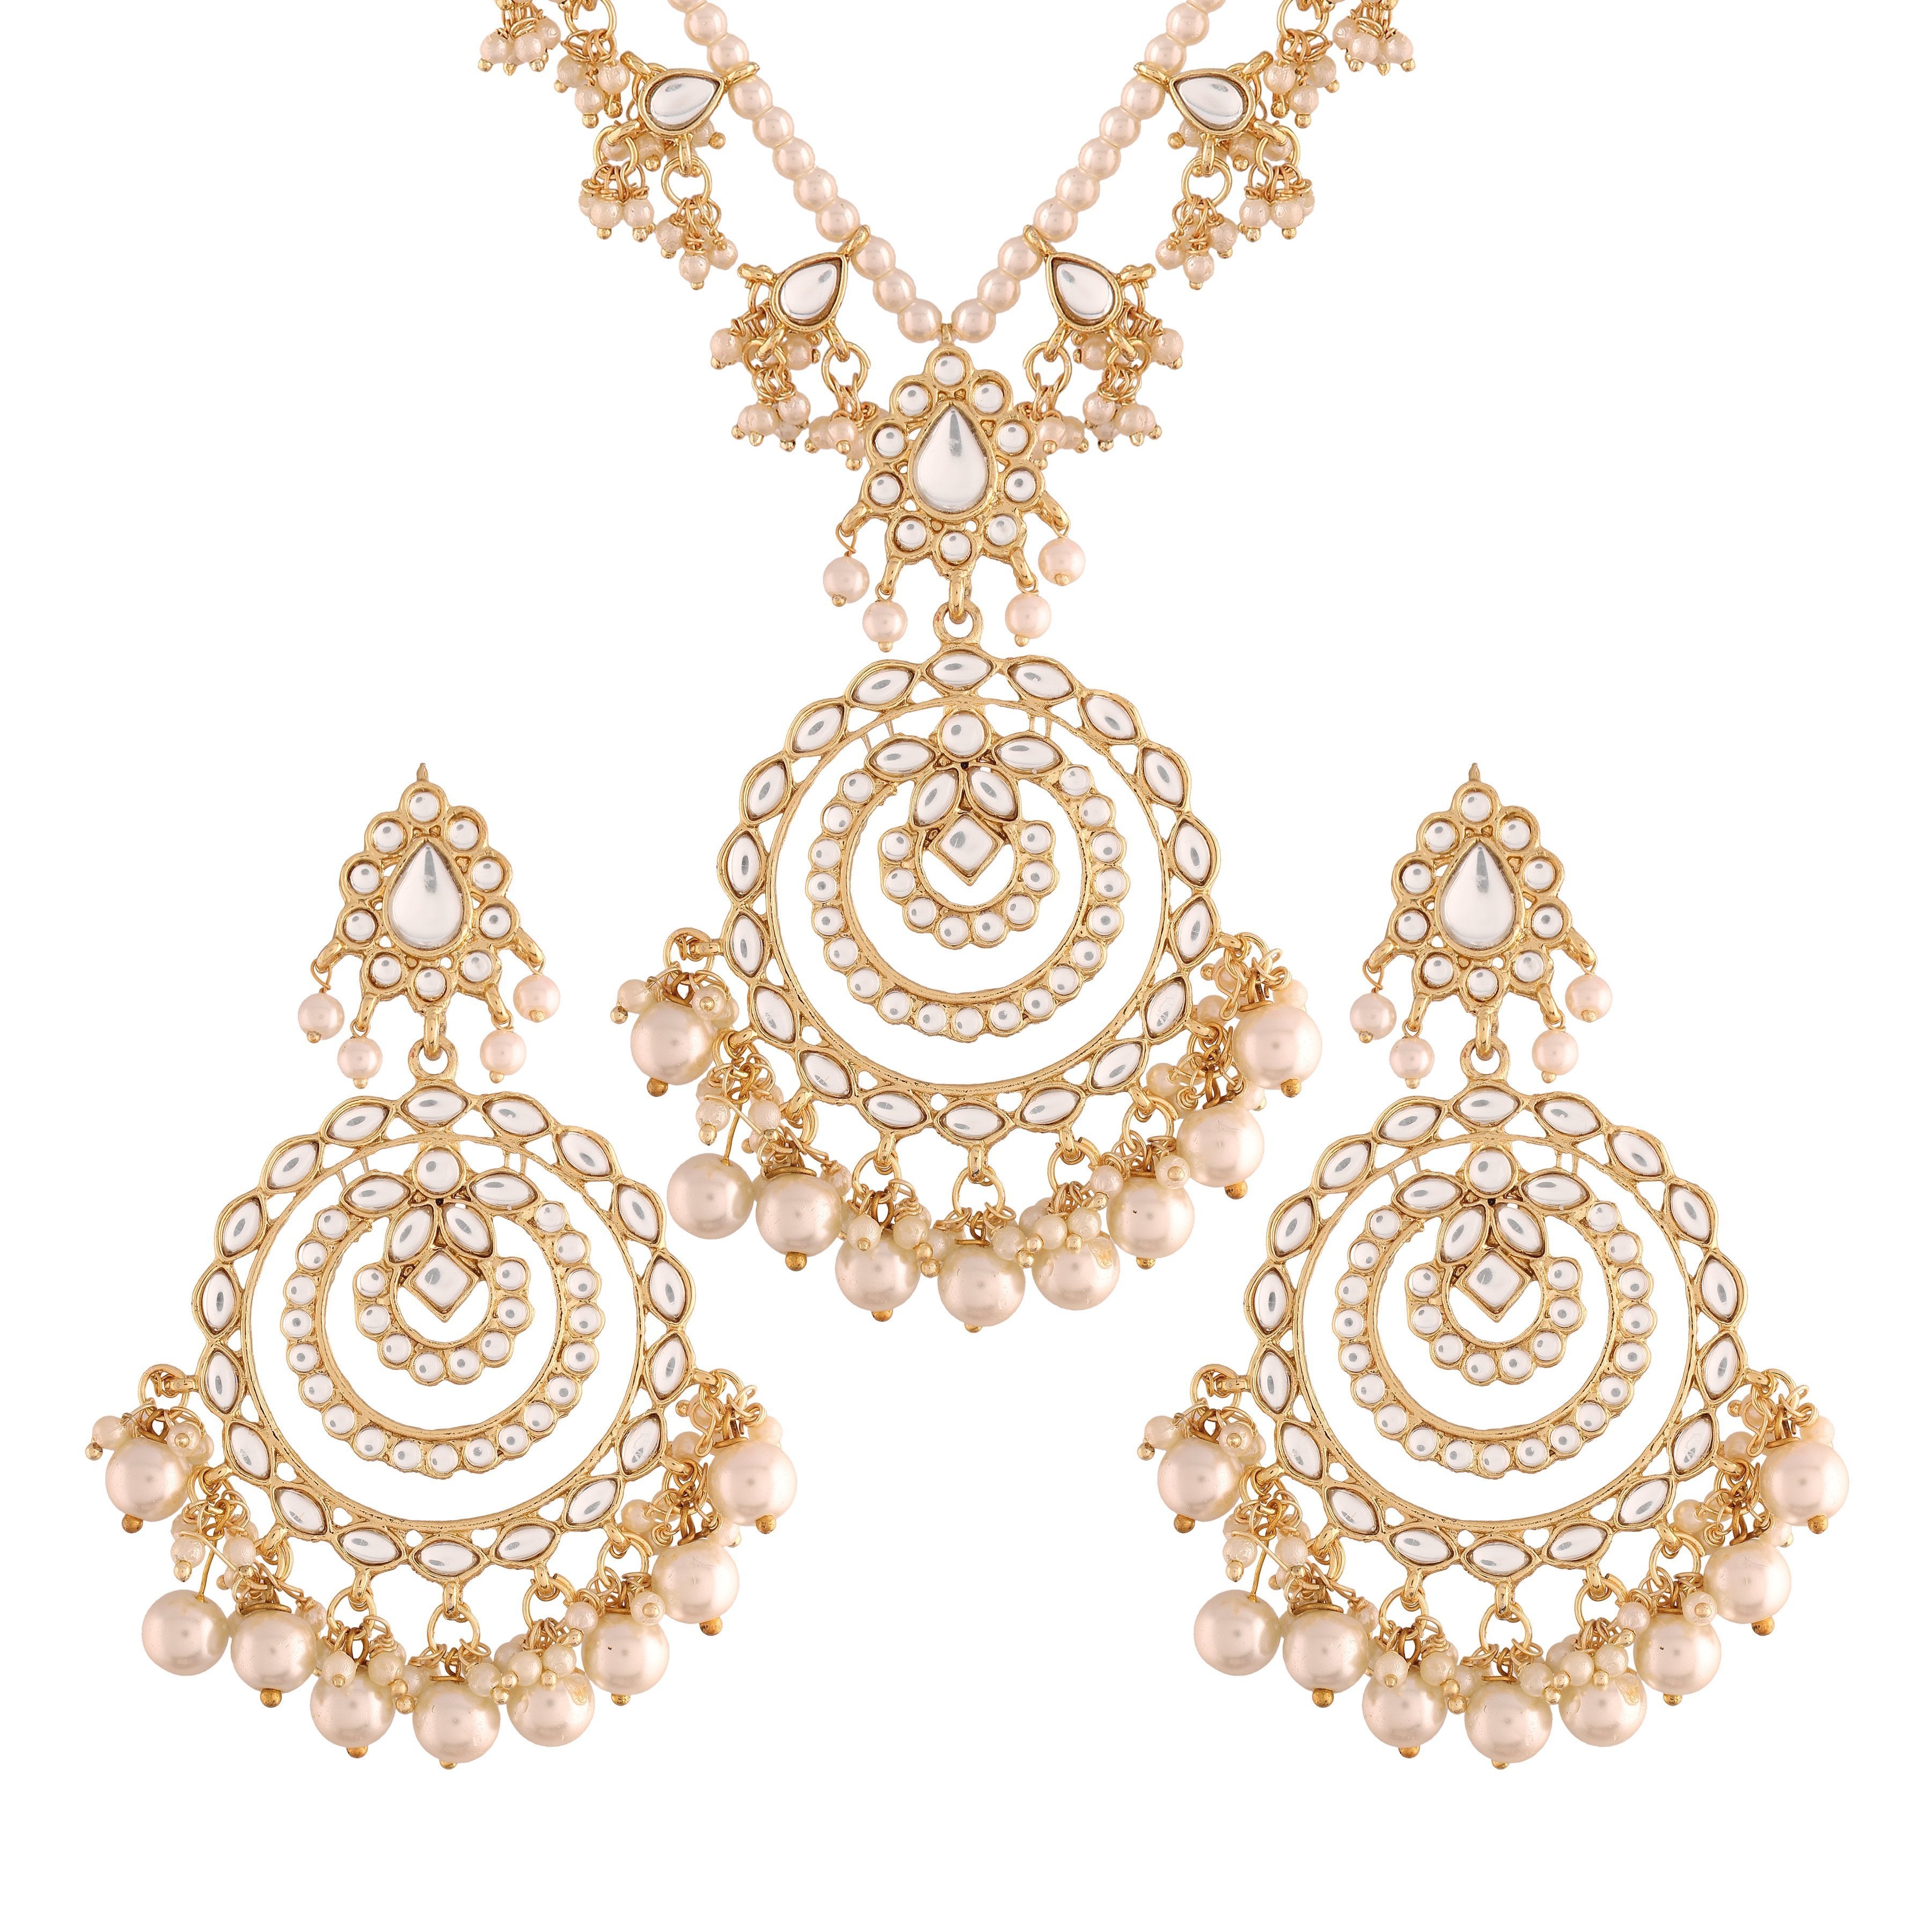 Women's Gold Plated White Ethnic Multi Layer Kundan Pearl Studded Long Necklace Set - i jewels